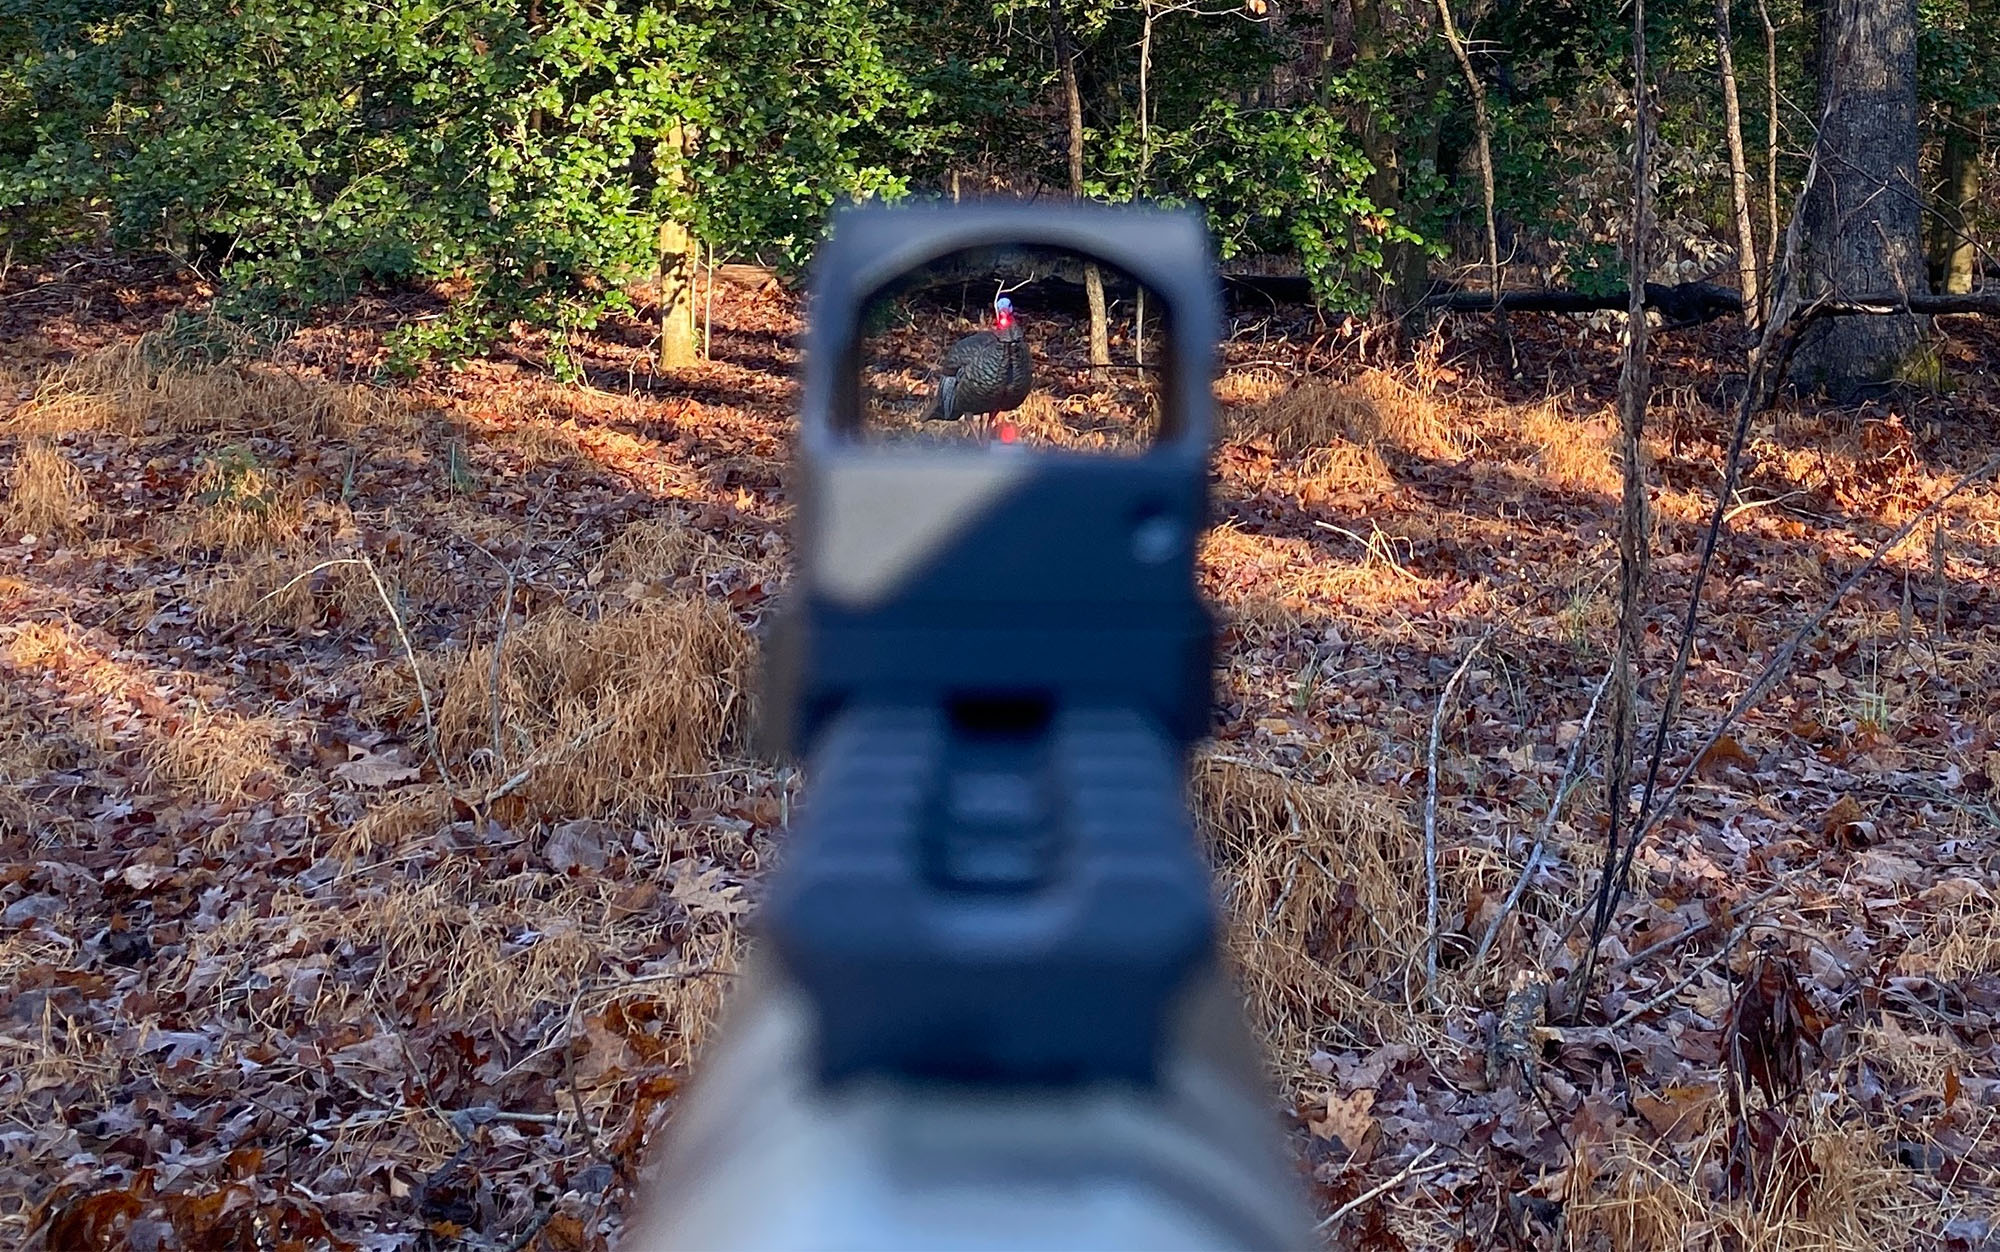 The Bushnell red dot is aimed at a turkey decoy.